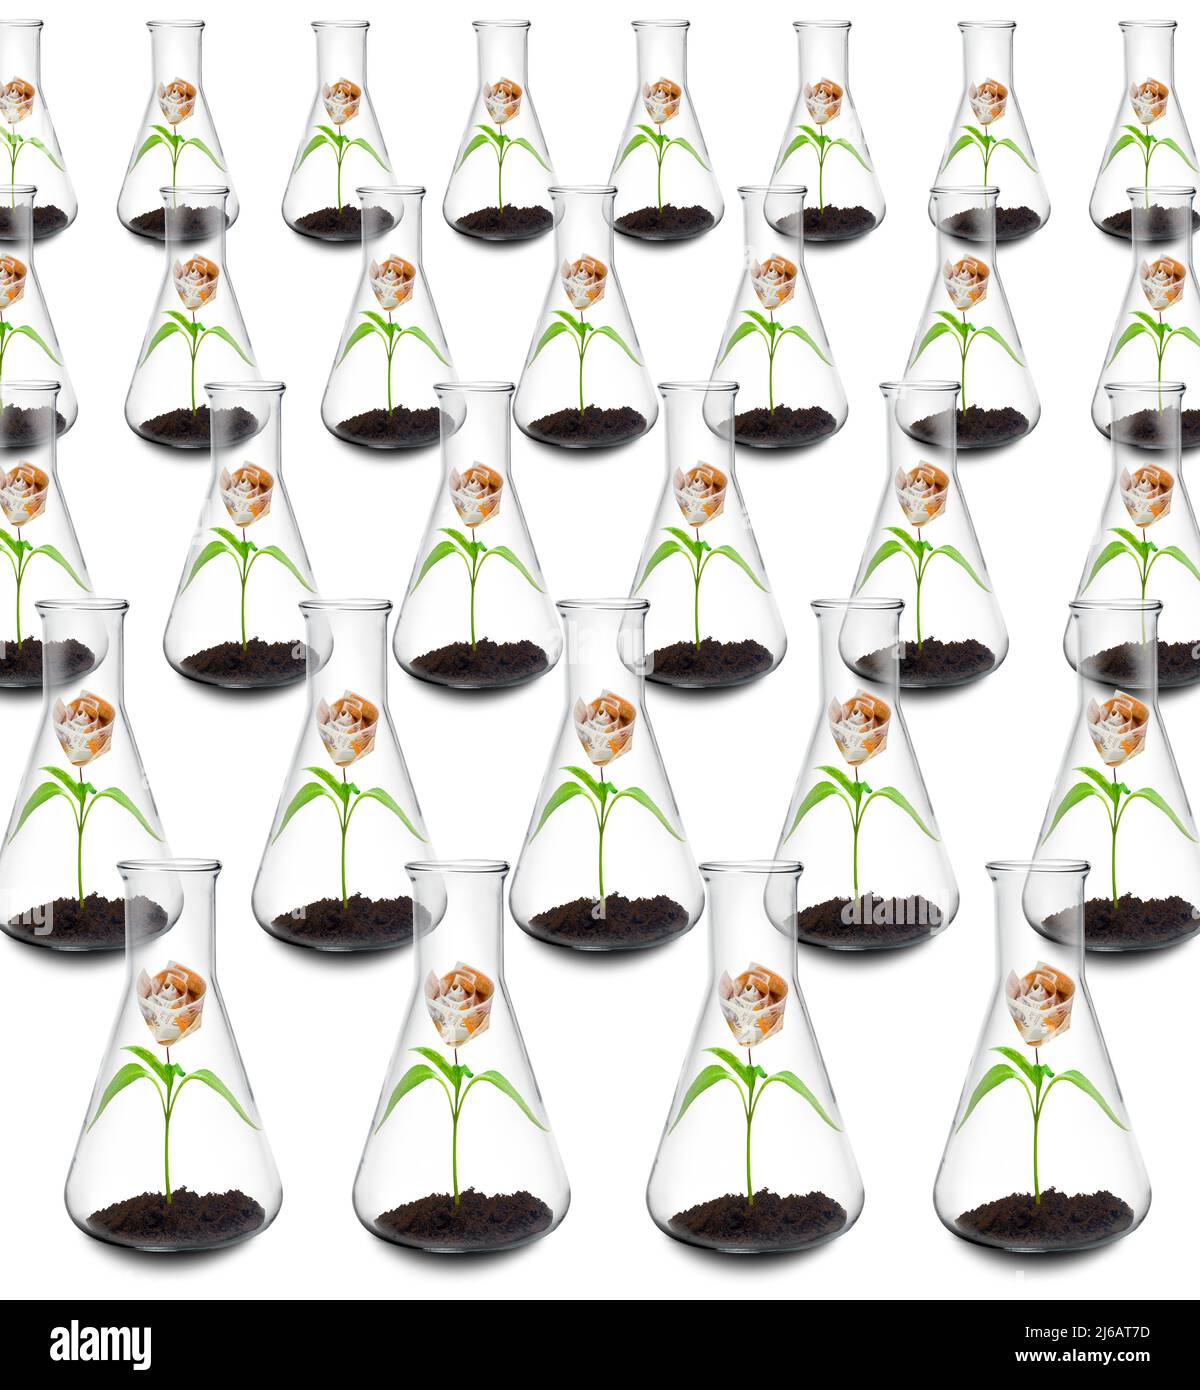 Money flowers growing in flasks, conceptual image Stock Photo